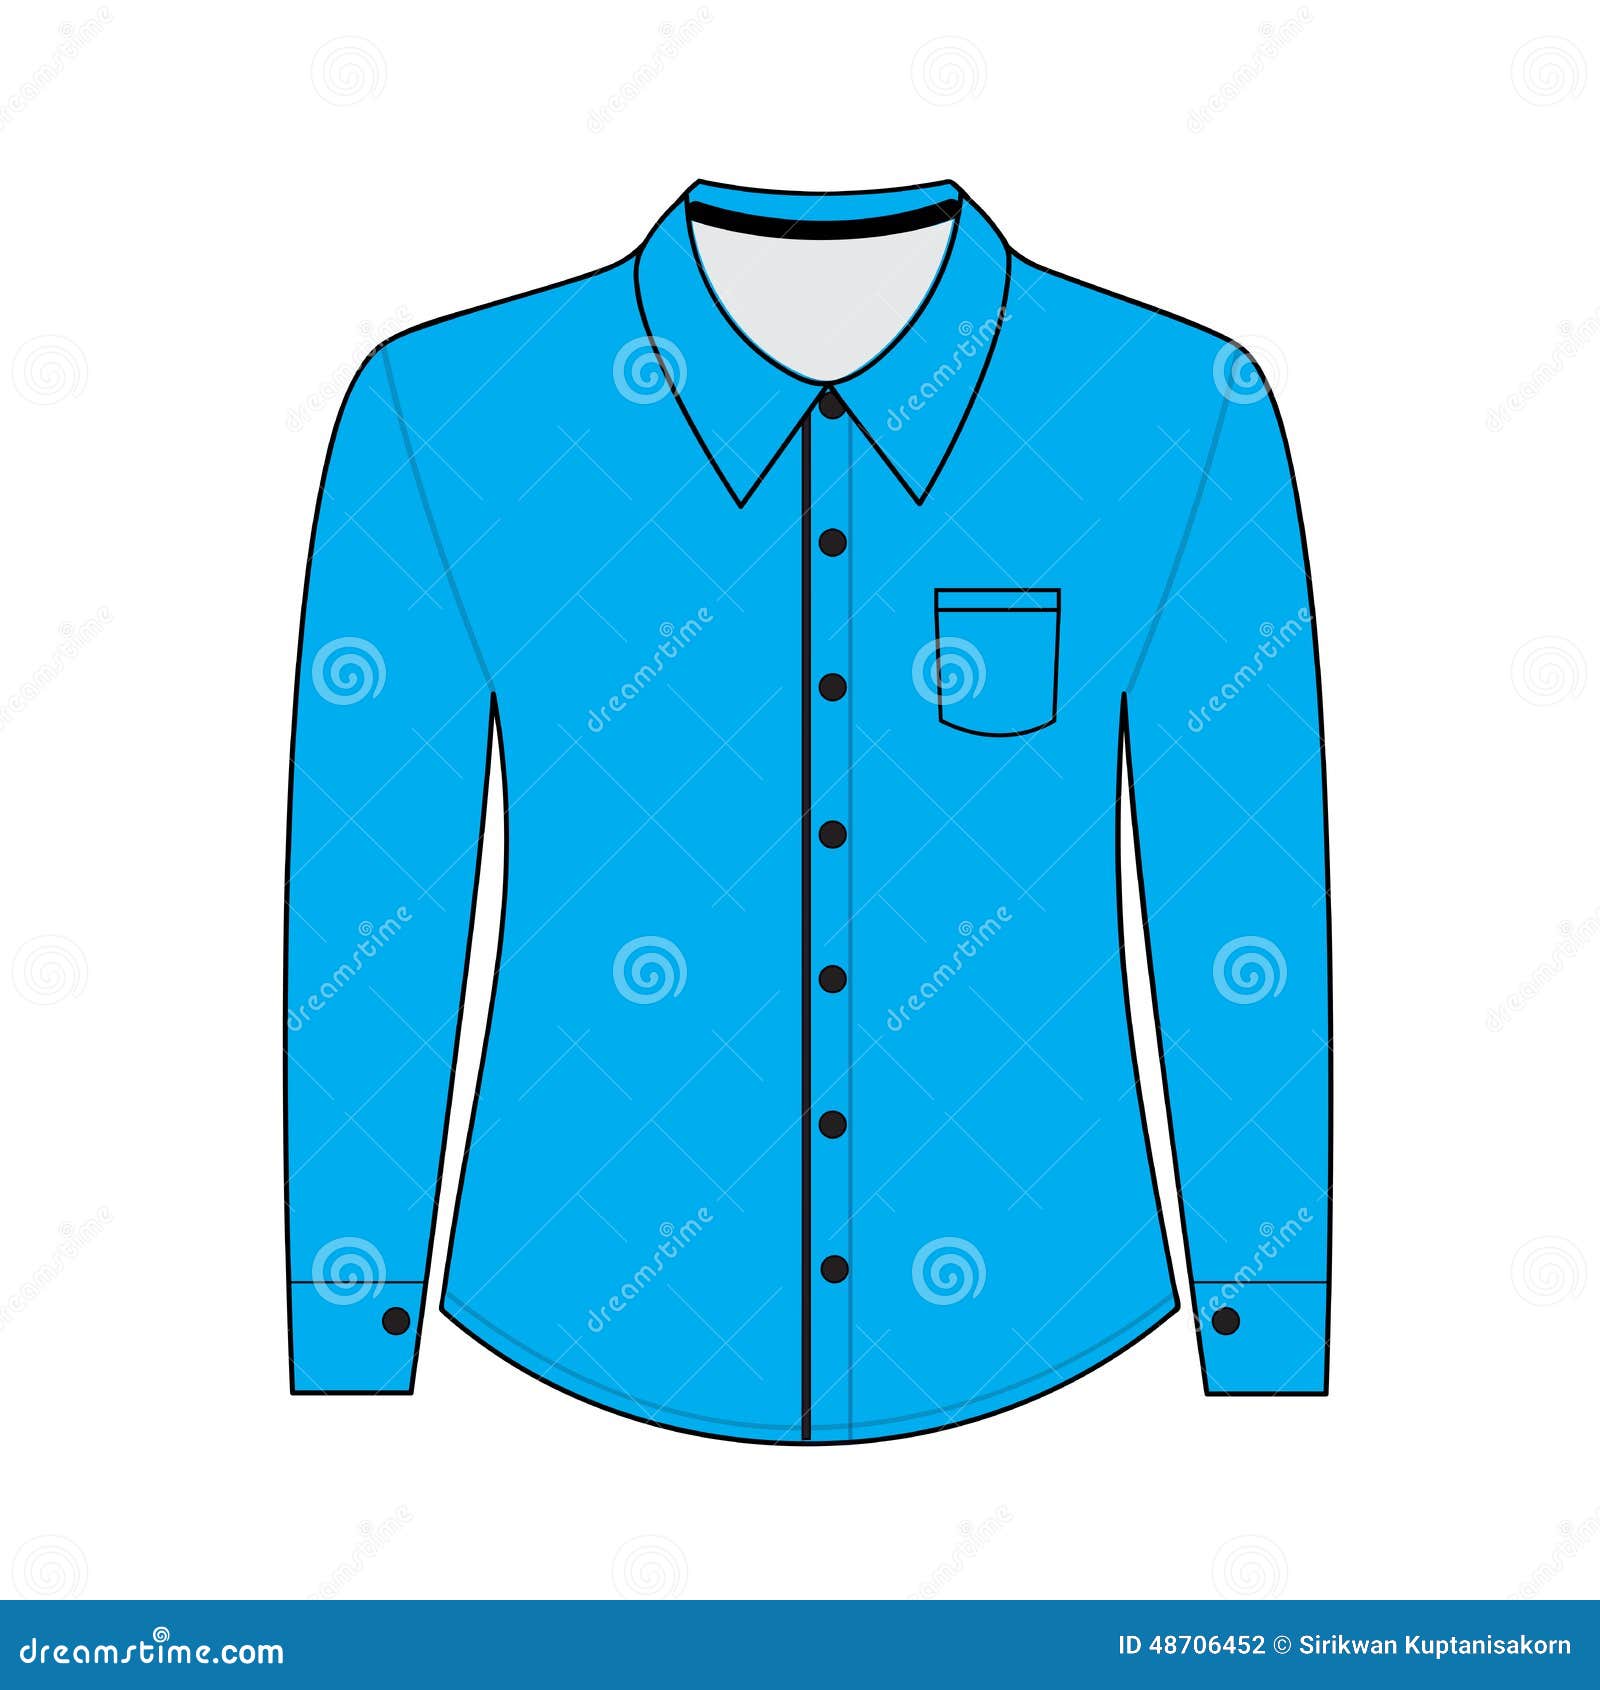 Shirt with long sleeves stock illustration. Illustration of collar ...